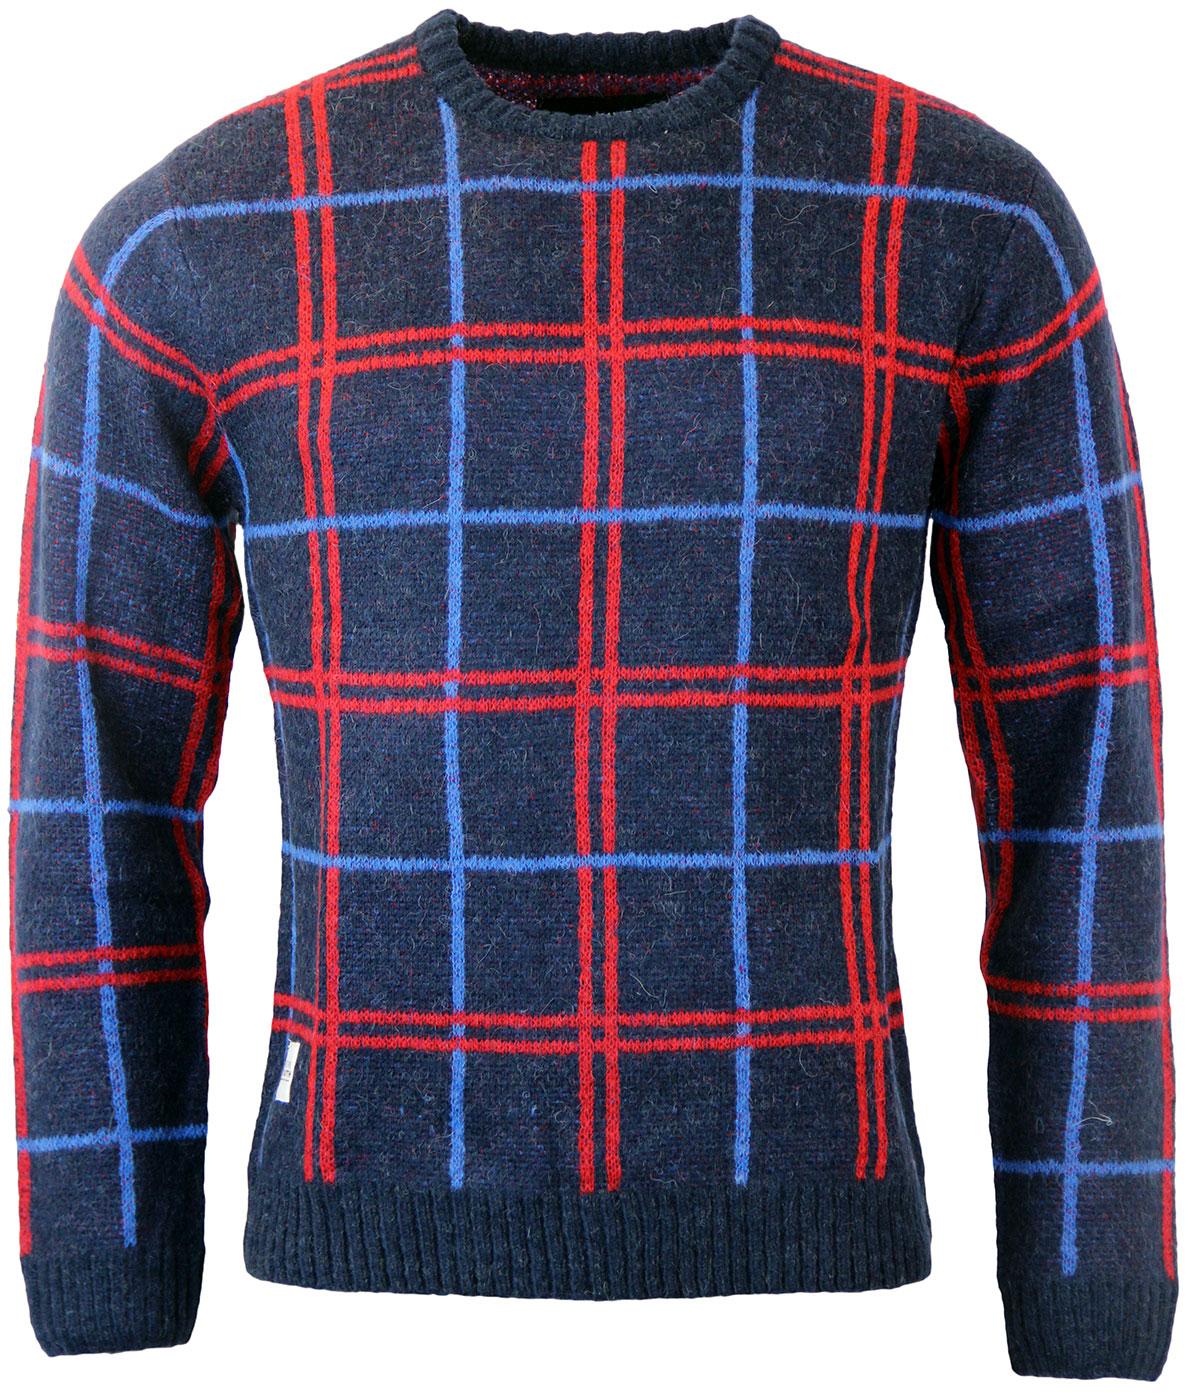 NATIVE YOUTH Retro Oversized Check Knit Jumper